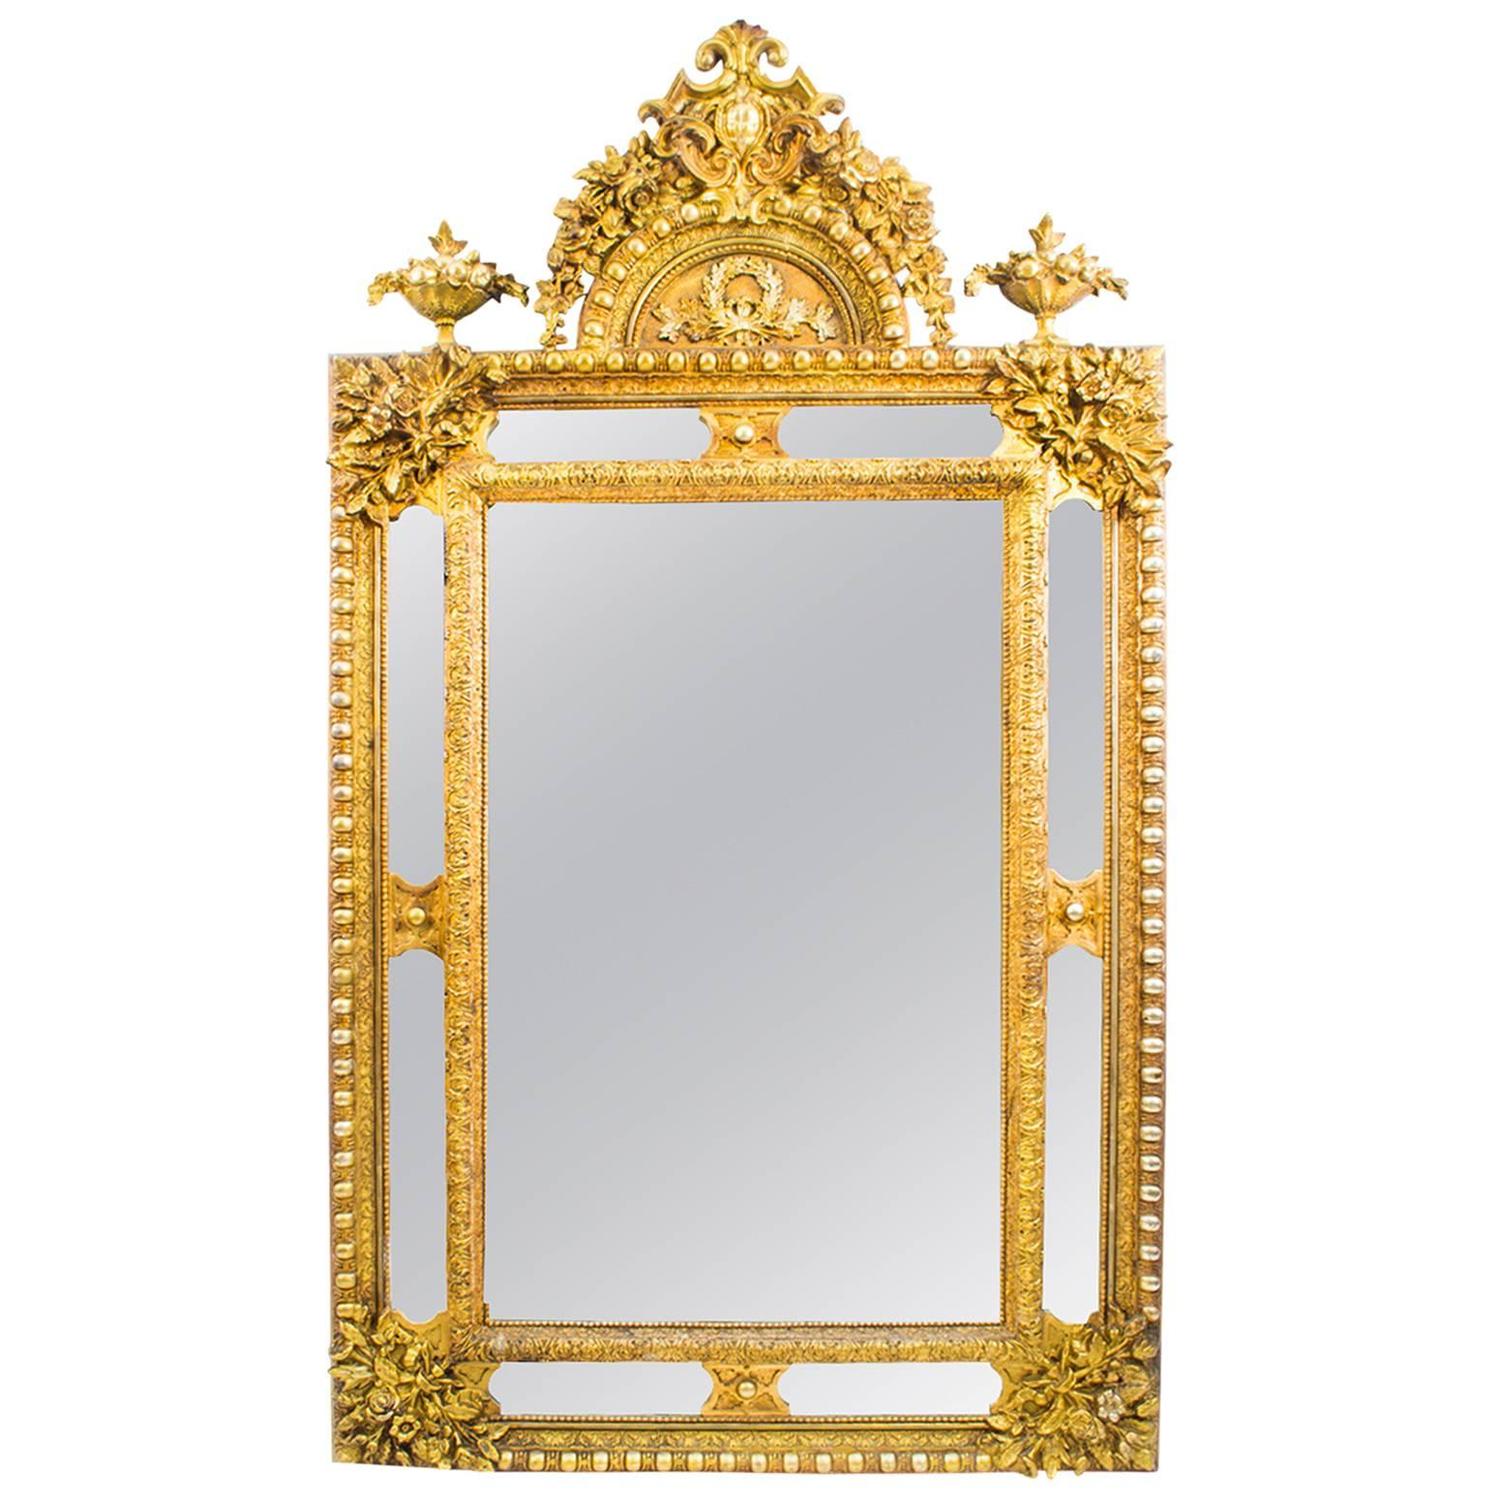 Antique Giltwood Overmantel Rococo Cushion Mirror, circa 1870 For Sale at 1stdibs